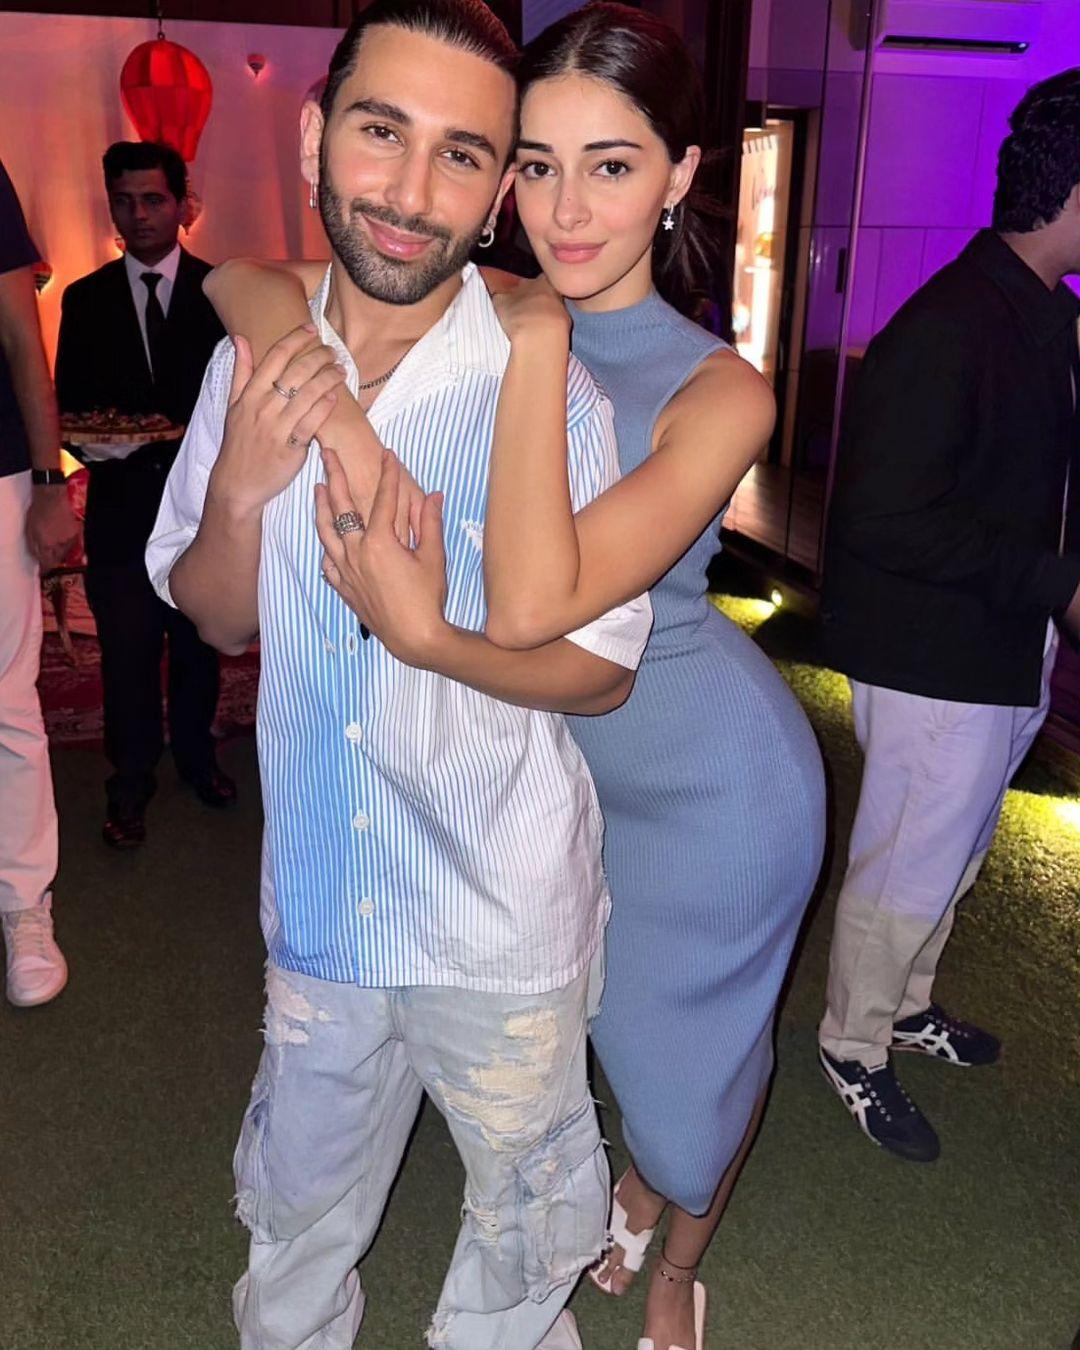 Orry snapped with his bestie Ananya Panday. How cute do these two look coordinated in blue?